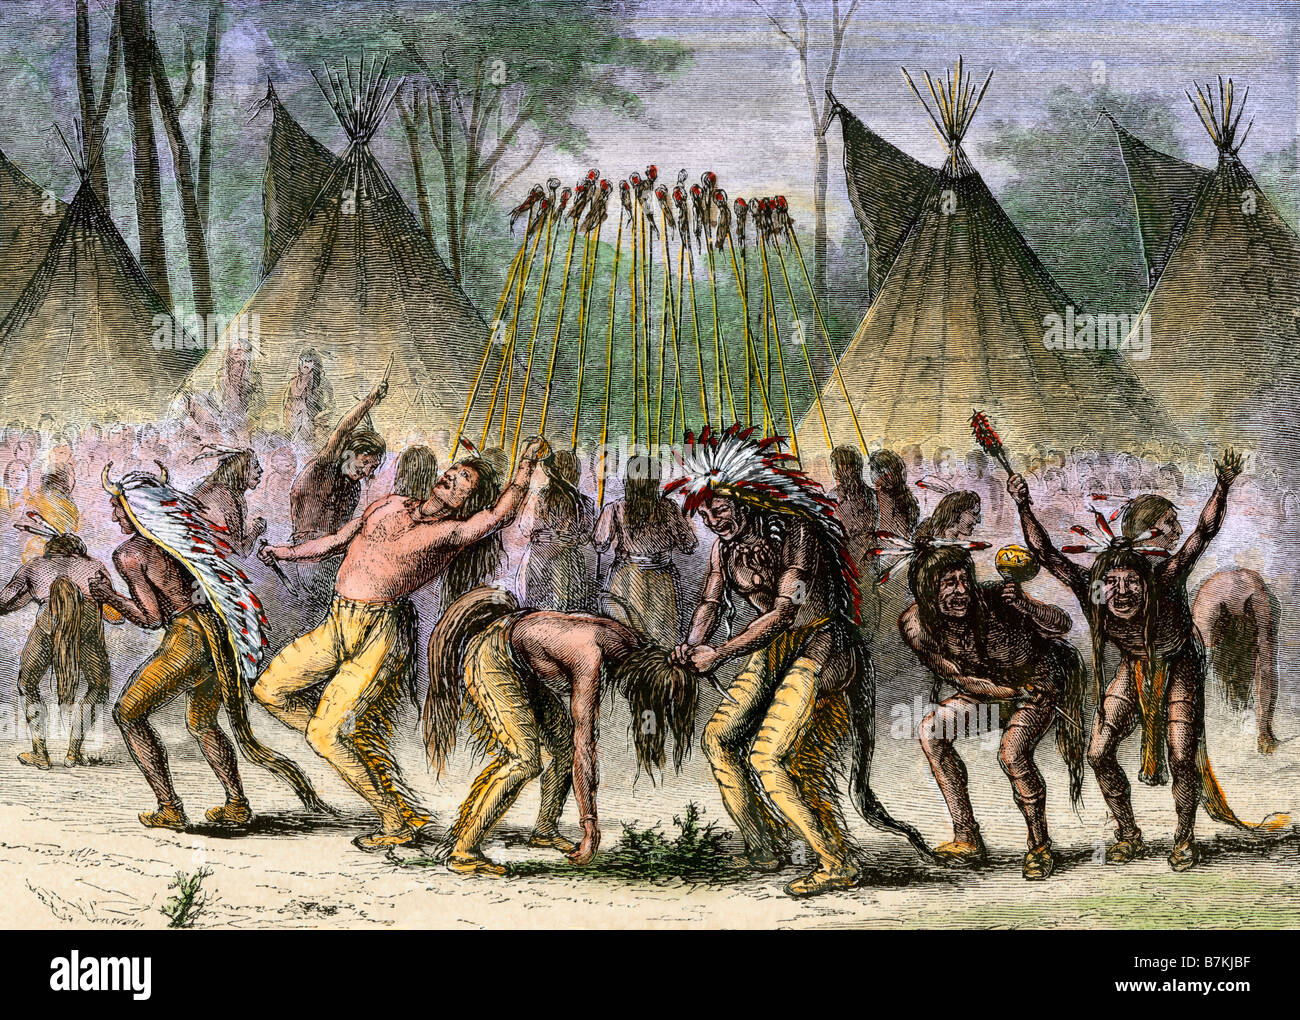 Native American war dance near the St. Lawrence River during the French and Indian War. Hand-colored woodcut Stock Photo